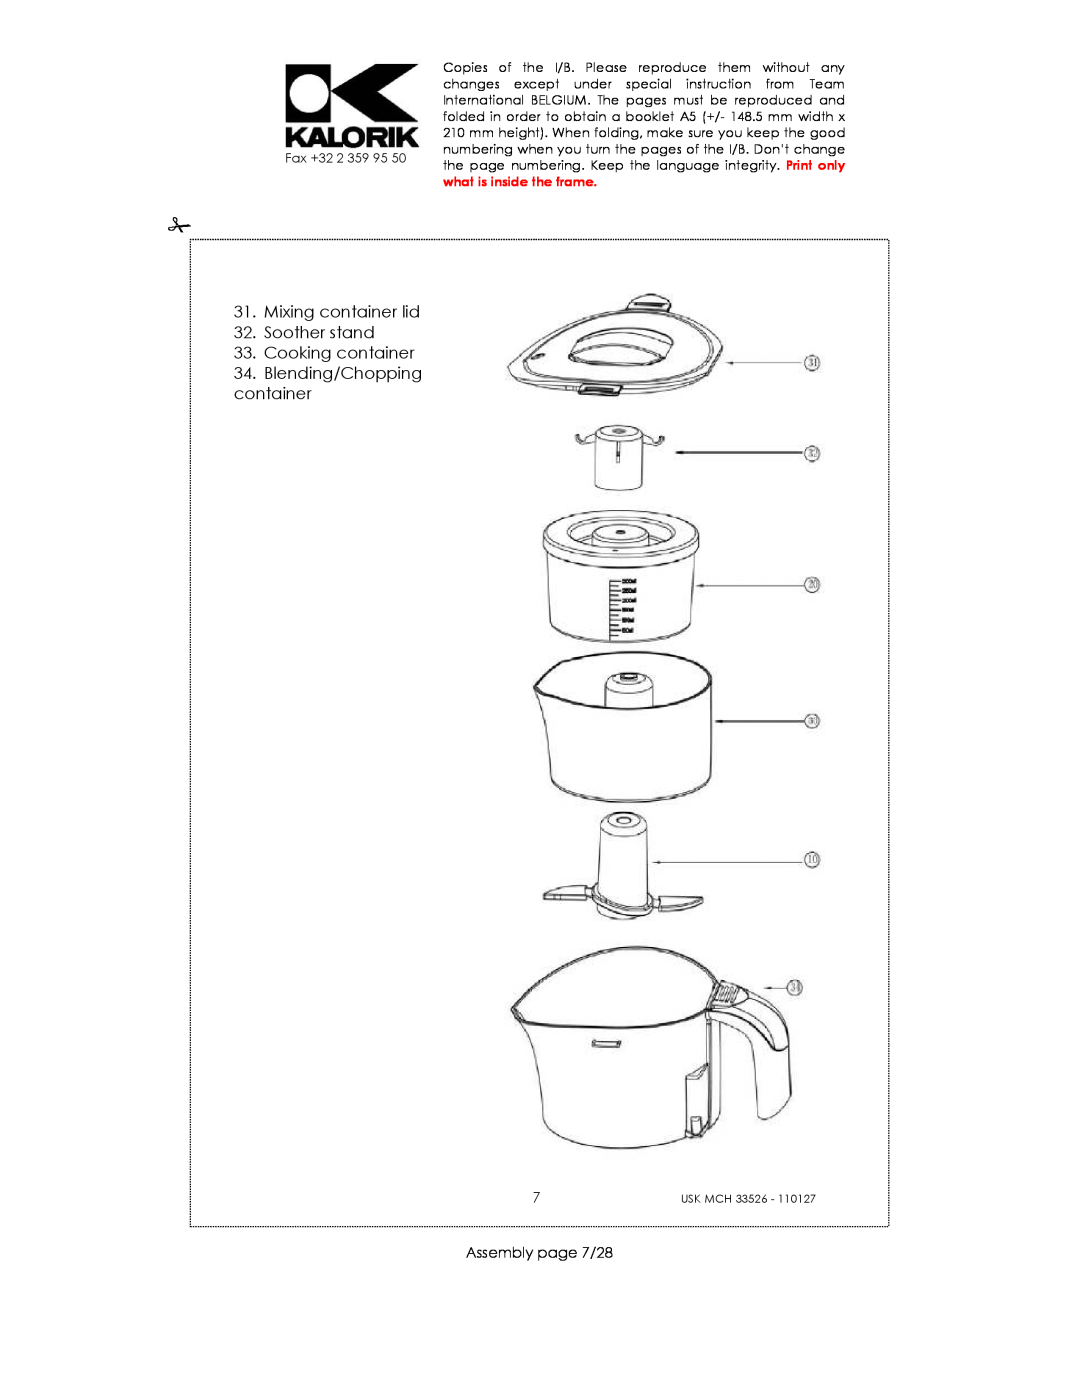 Kalorik USK MCH 33526 manual Mixing container lid 32. Soother stand 33. Cooking container, Blending/Chopping container 